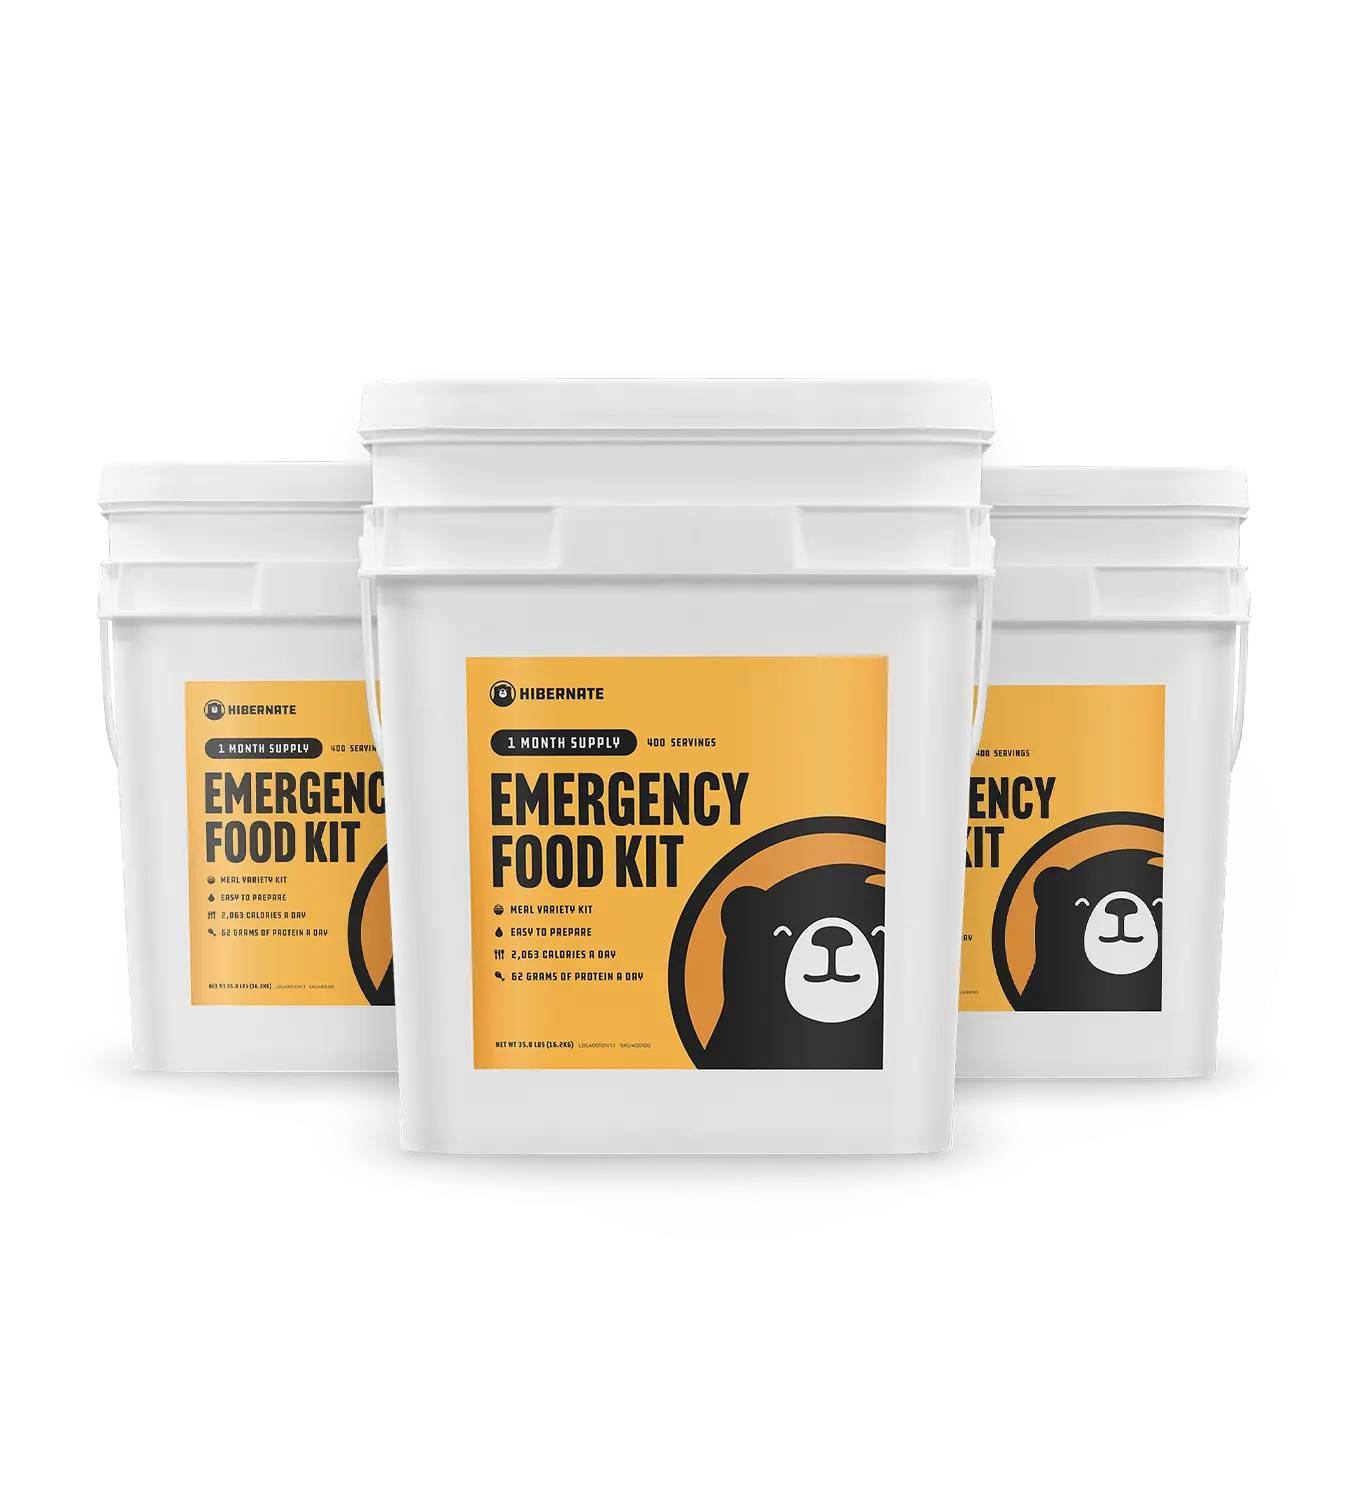 Three buckets of premium emergency food supply kit with over 2000 calories per day and 1200 total servings.